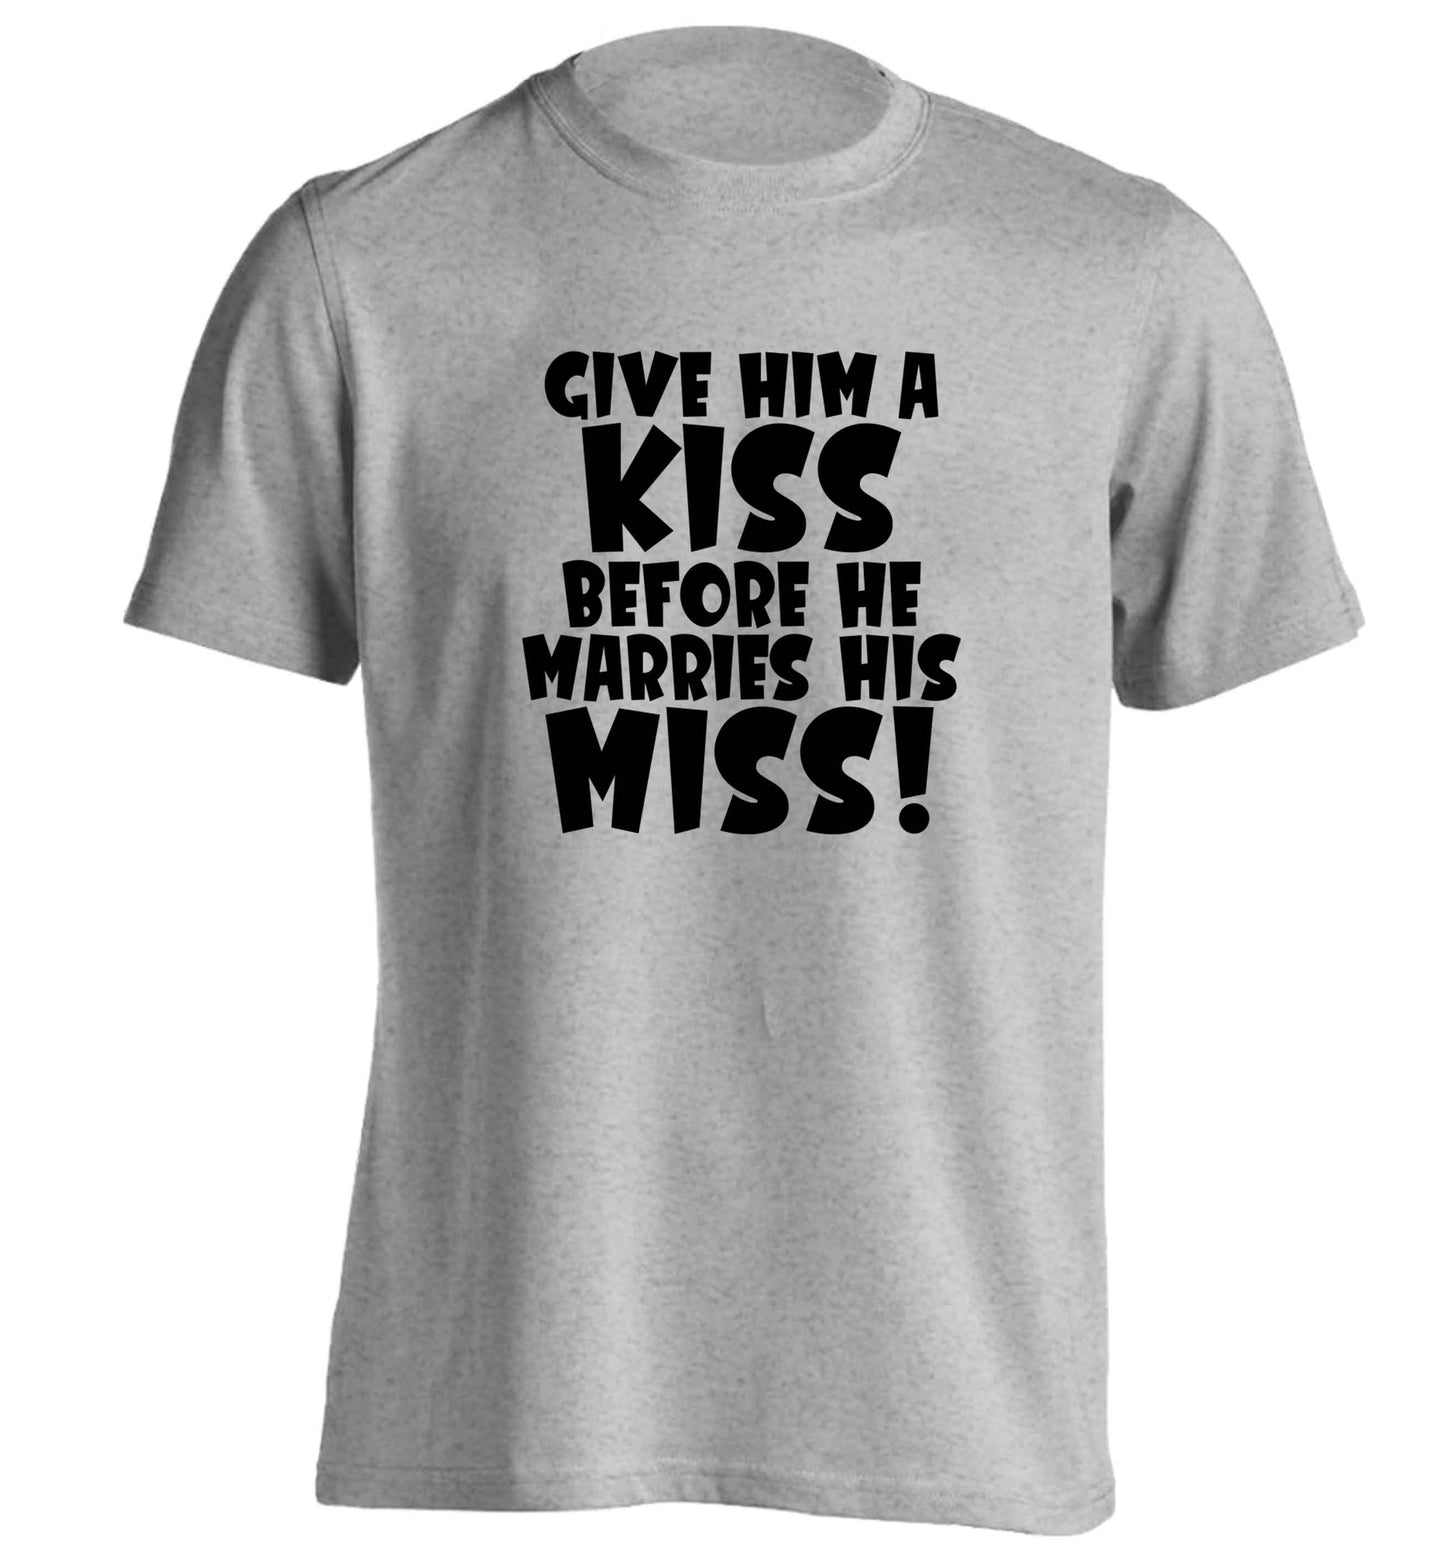 Give him a kiss before he marries his miss adults unisex grey Tshirt 2XL